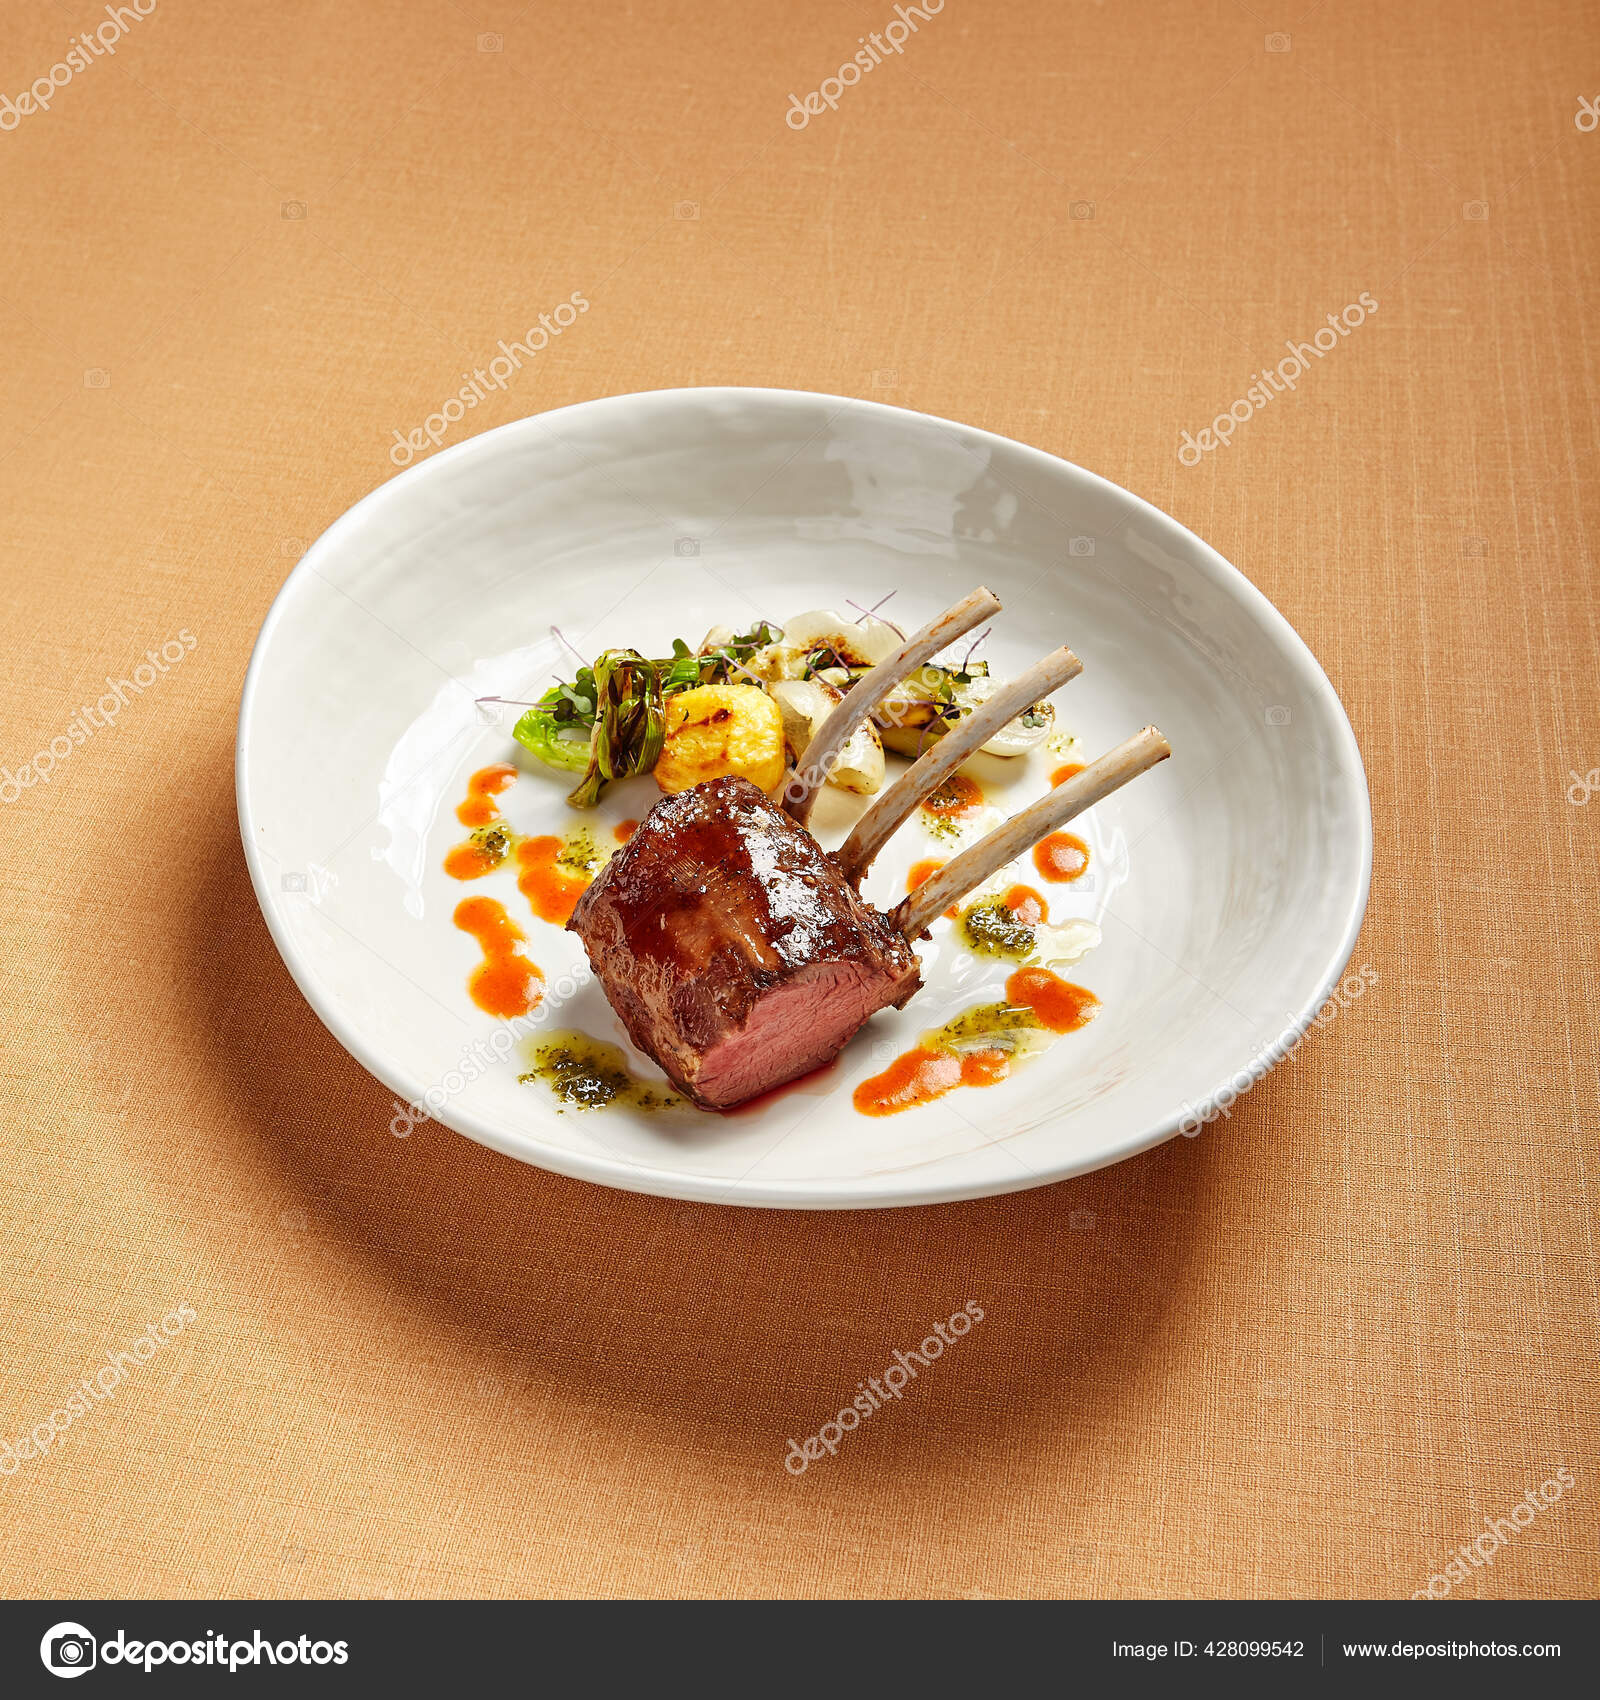 Luxury gourmet food. Veal cooking recipe. Elegant expensive restaurant  meal. Meat dish on plate. Stock Photo